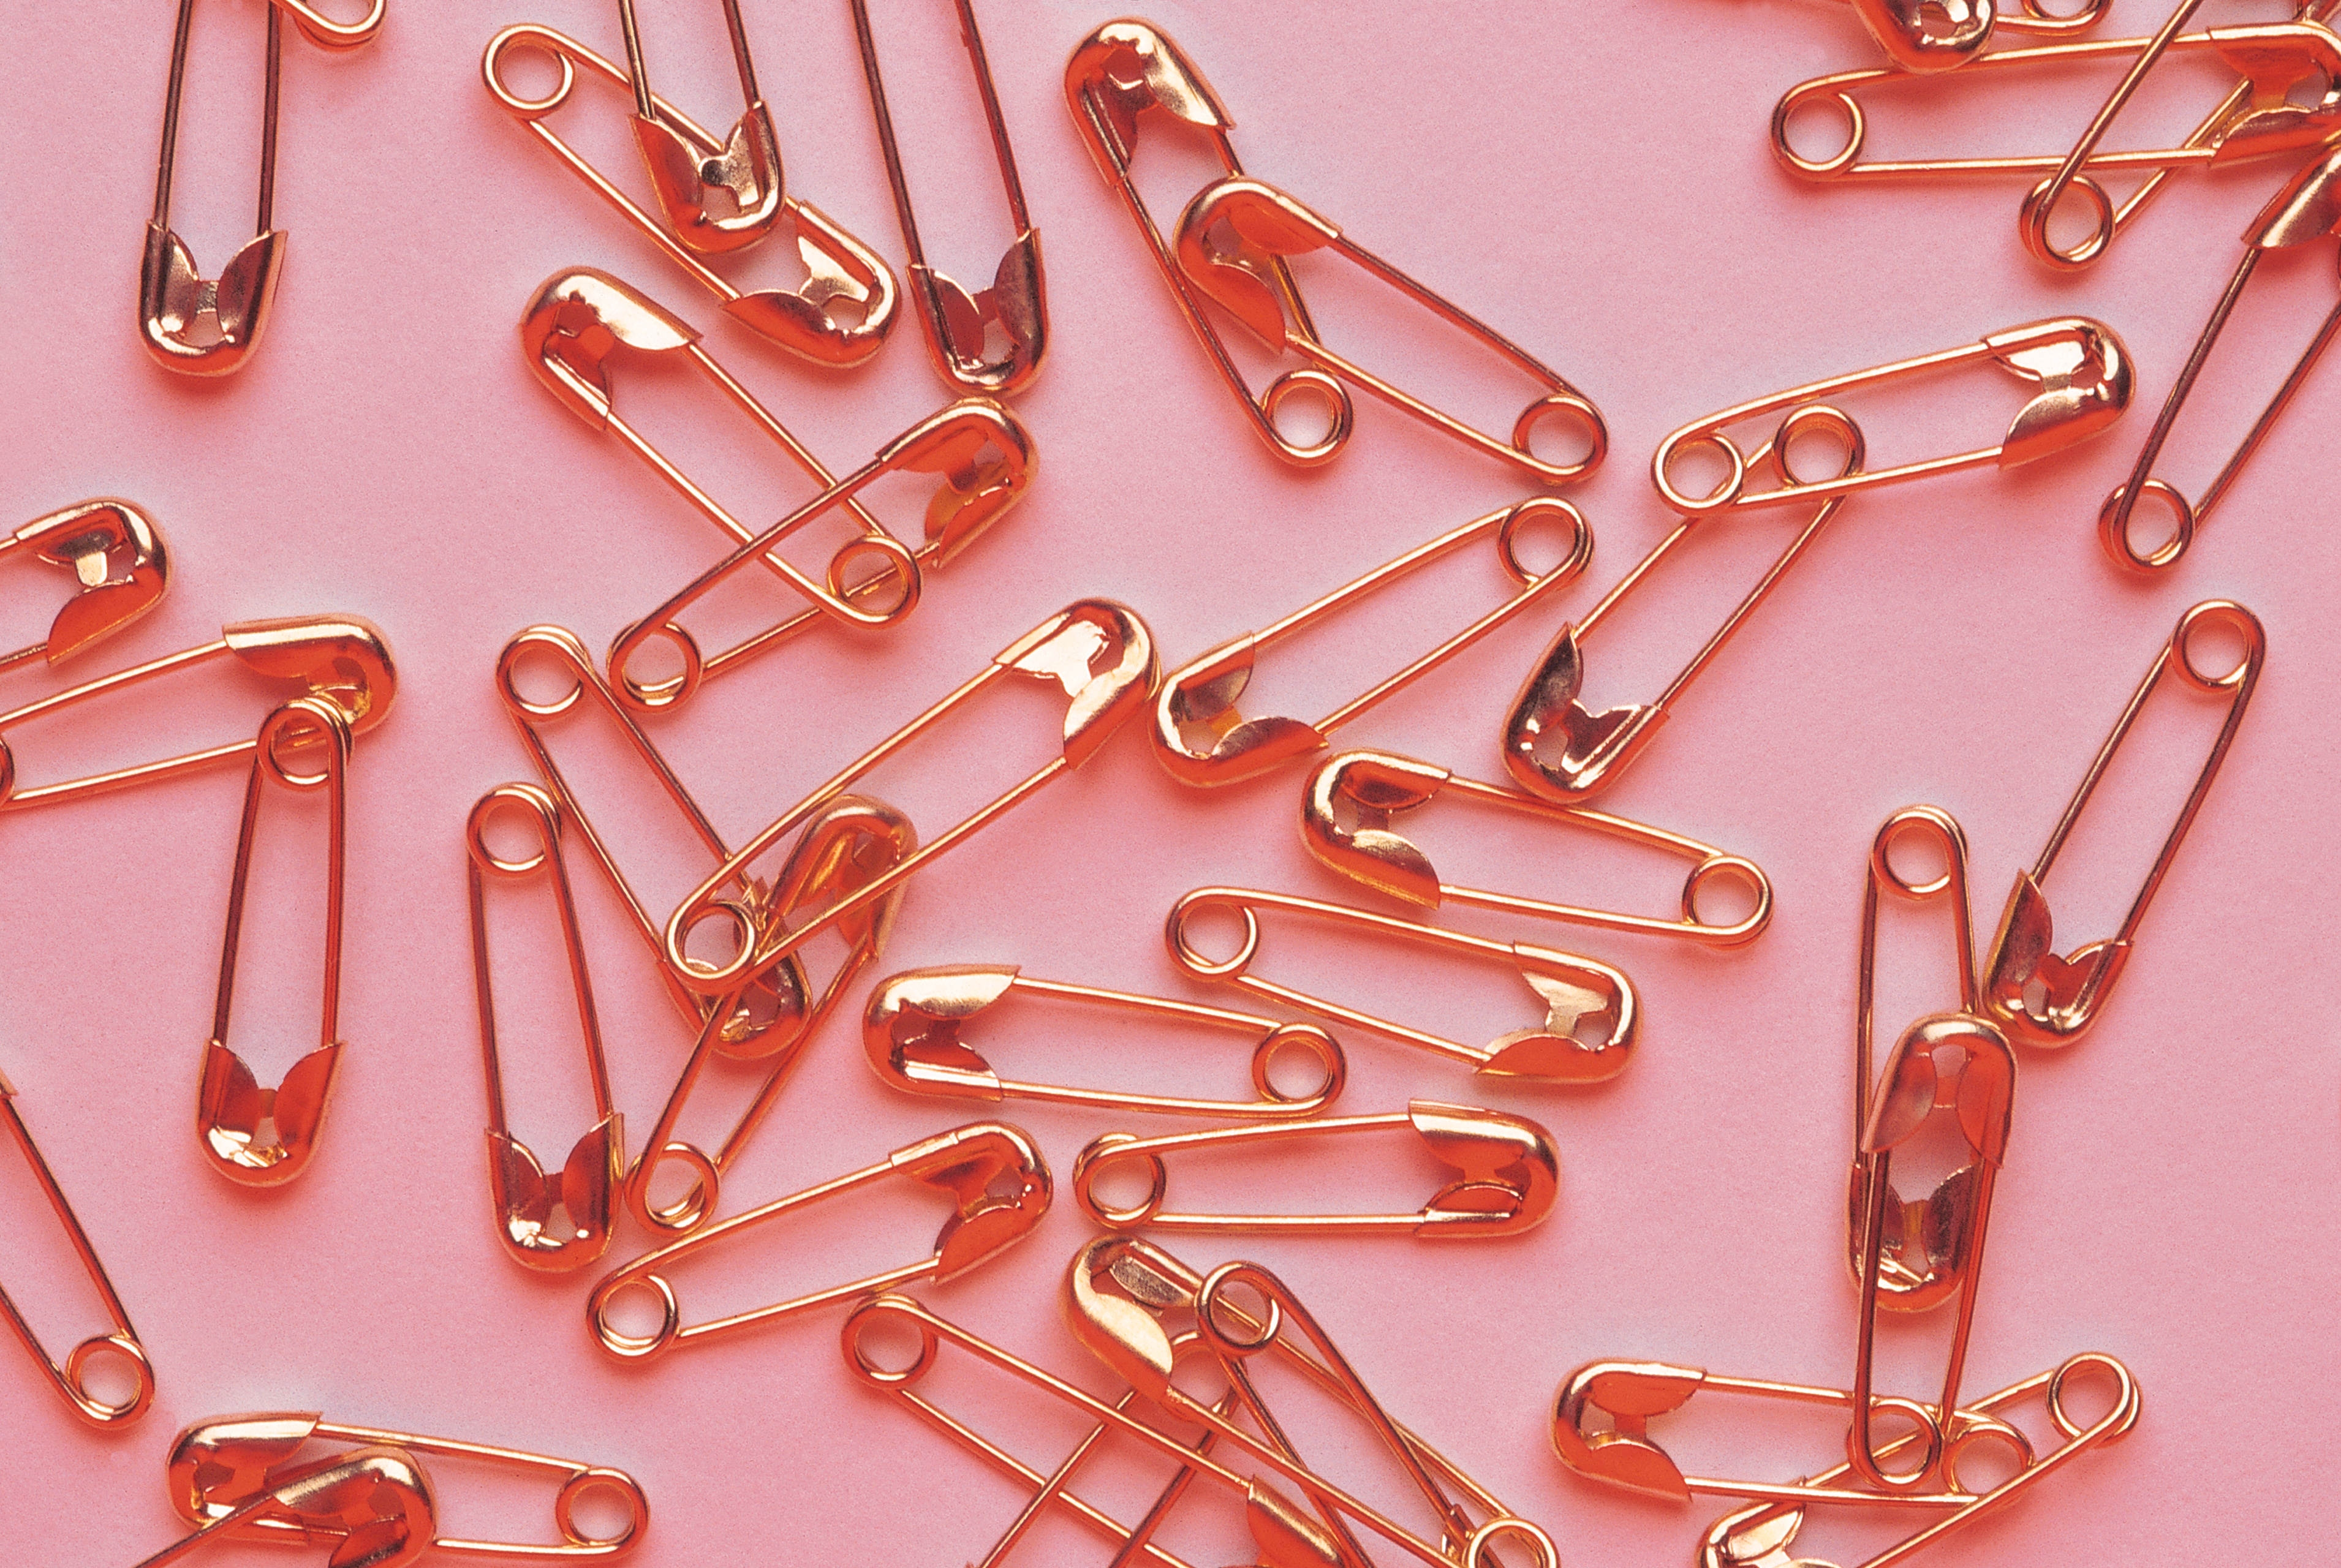 metal, gold, pink background, miscellanea, miscellaneous, pins, safety pins 2160p